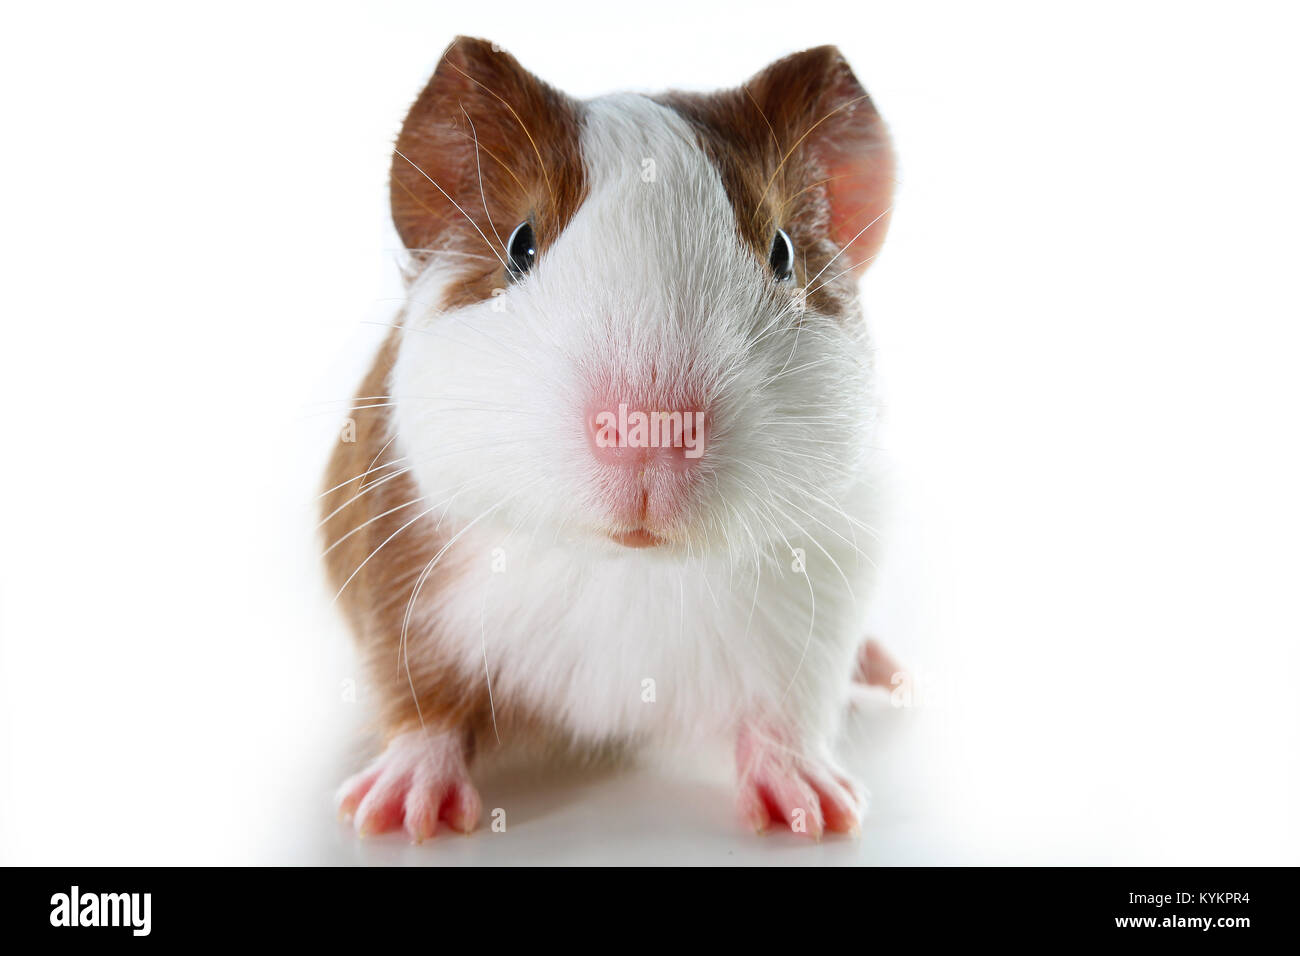 Dutch guinea pig on studio white background. Isolated white pet photo. Sheltie peruvian pigs with symmetric pattern. Domestic guinea pig Cavia porcell Stock Photo